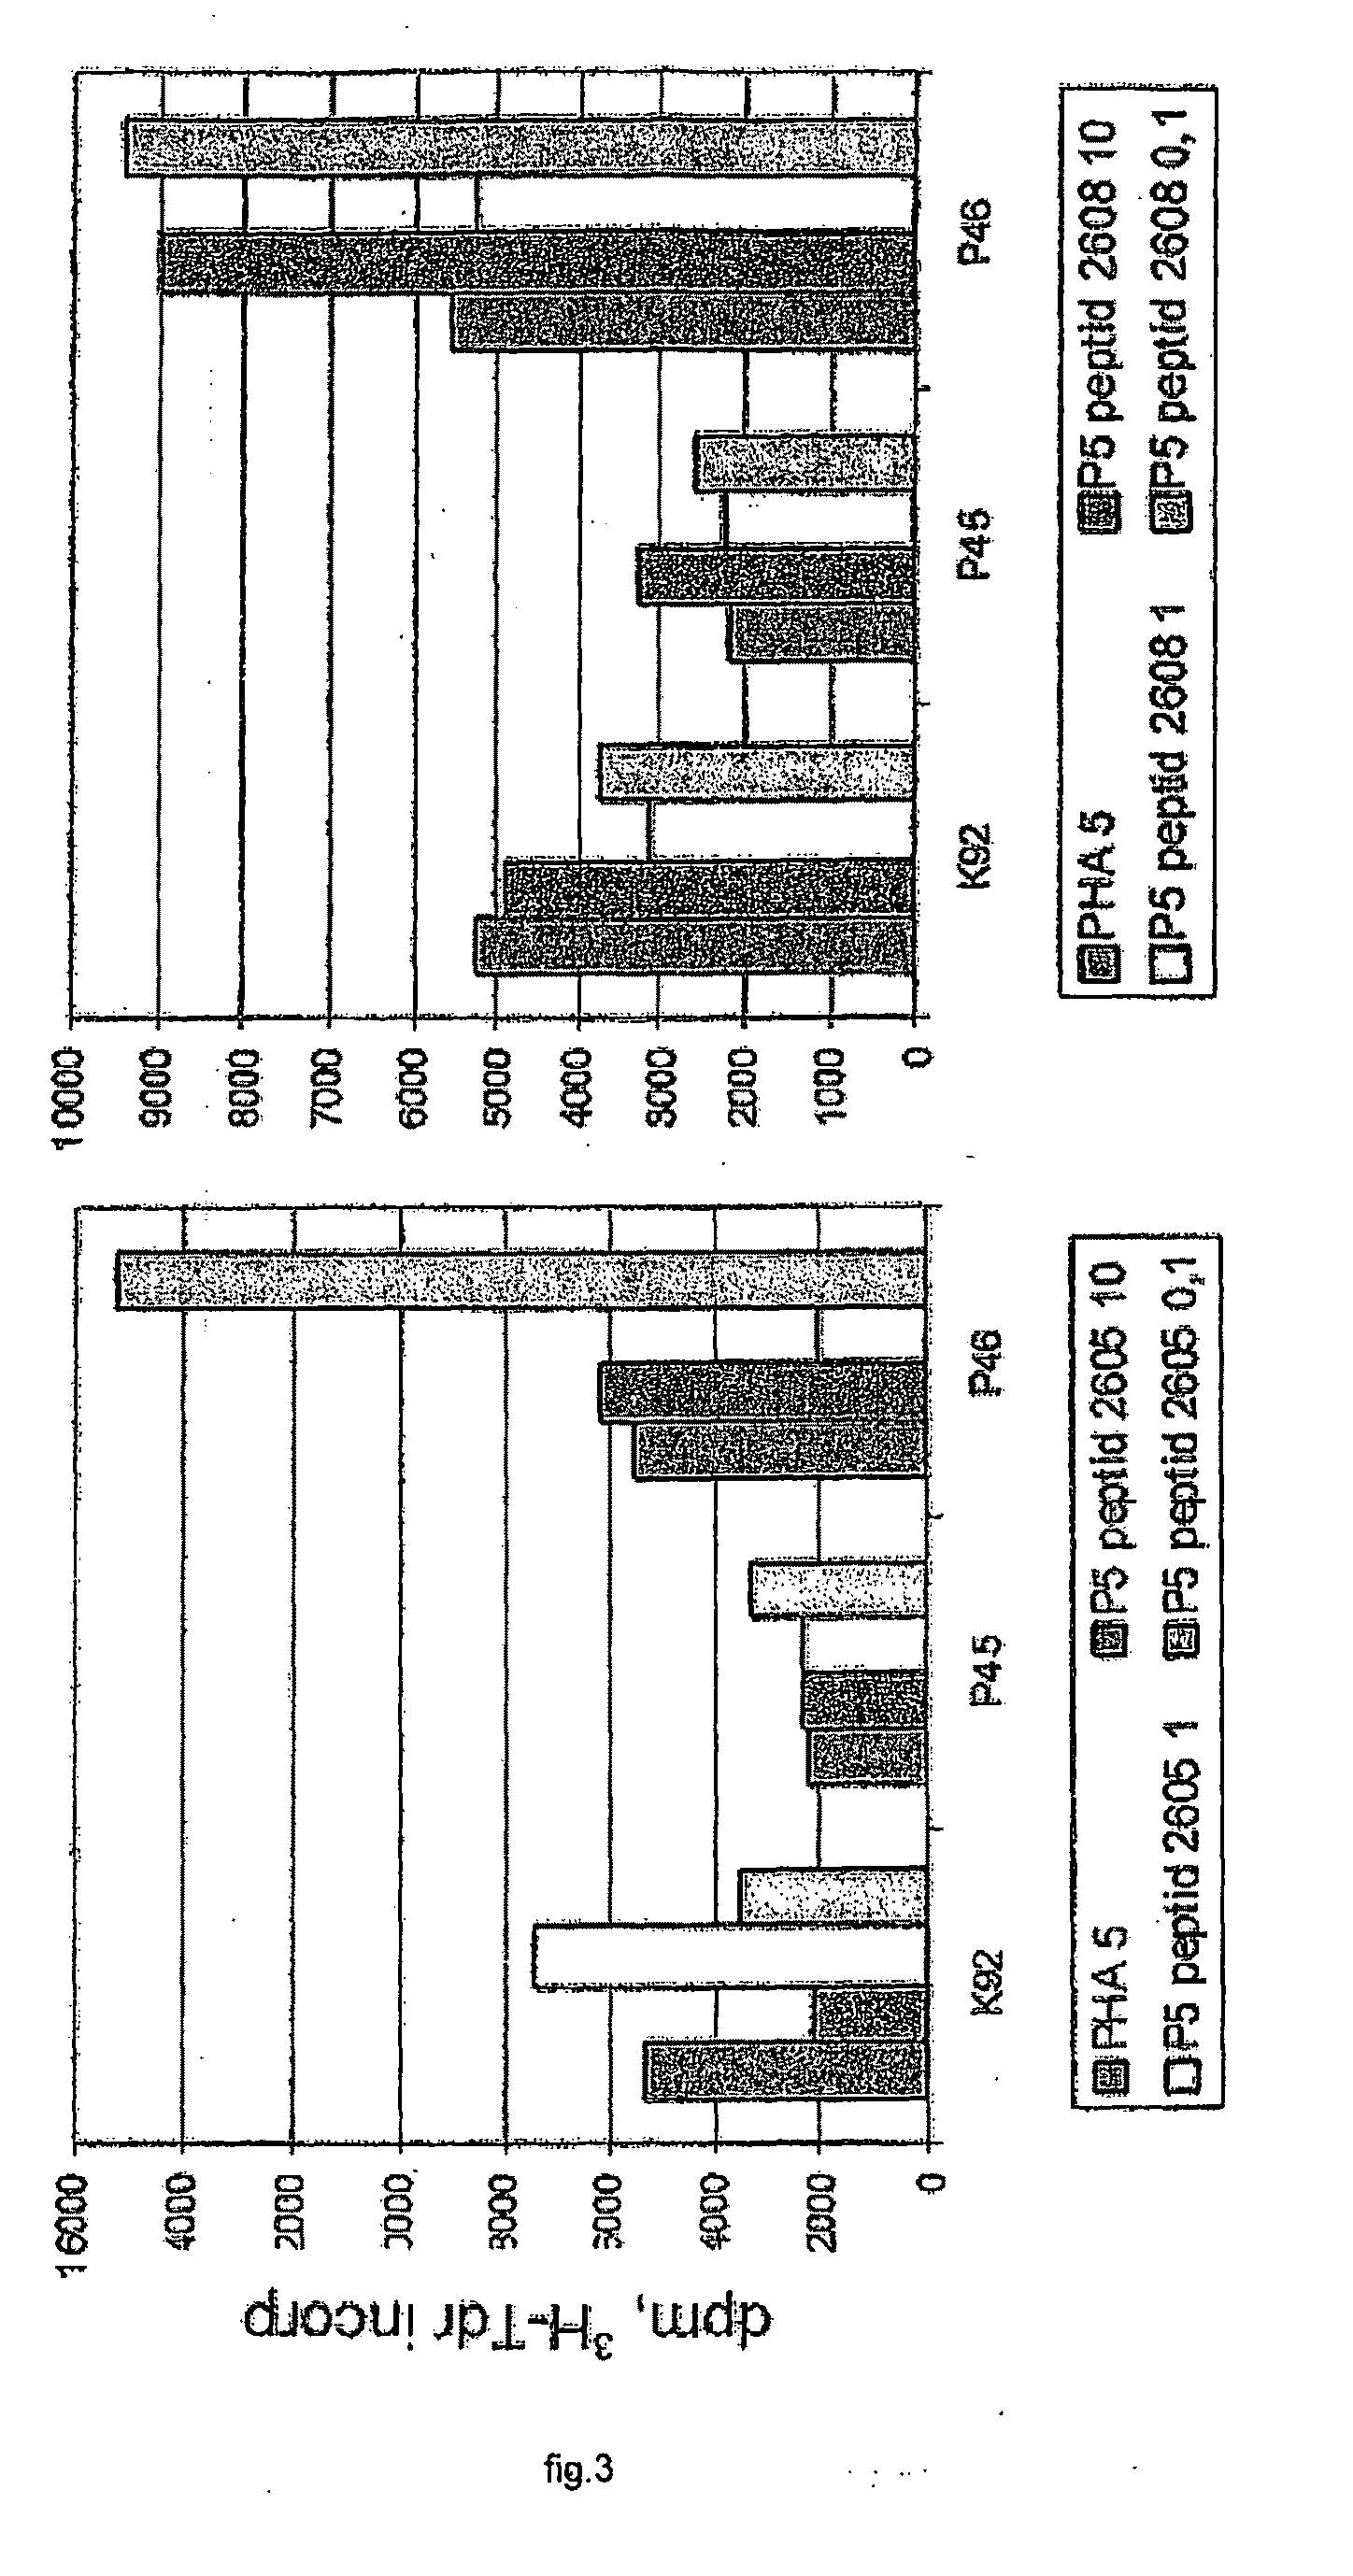 Immunoregulatory structures from normally occurring proteins